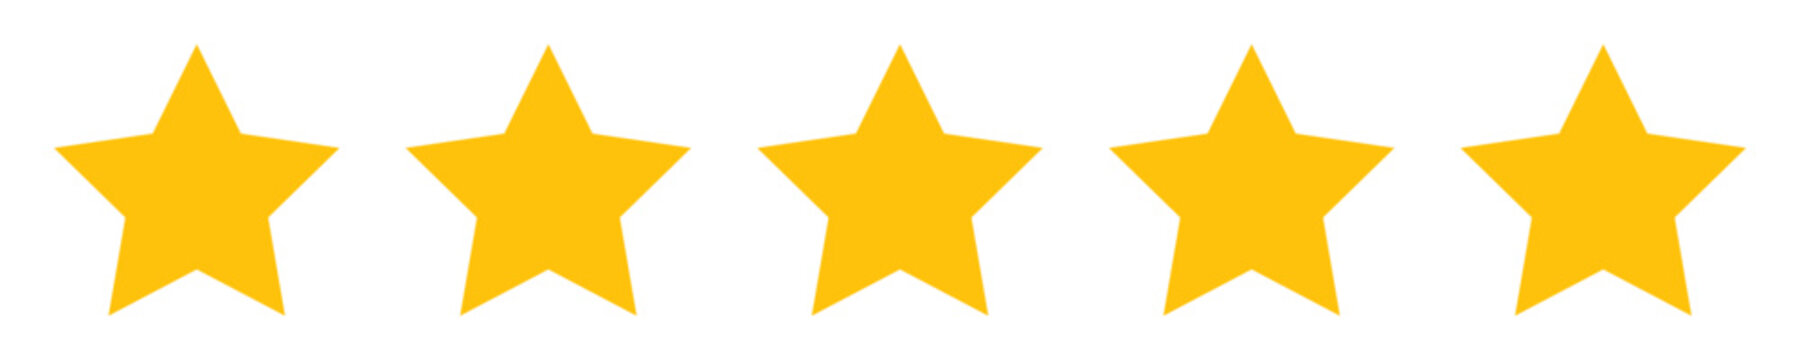 five stars customer product rating review flat icon for apps and websites. quality rating star icon